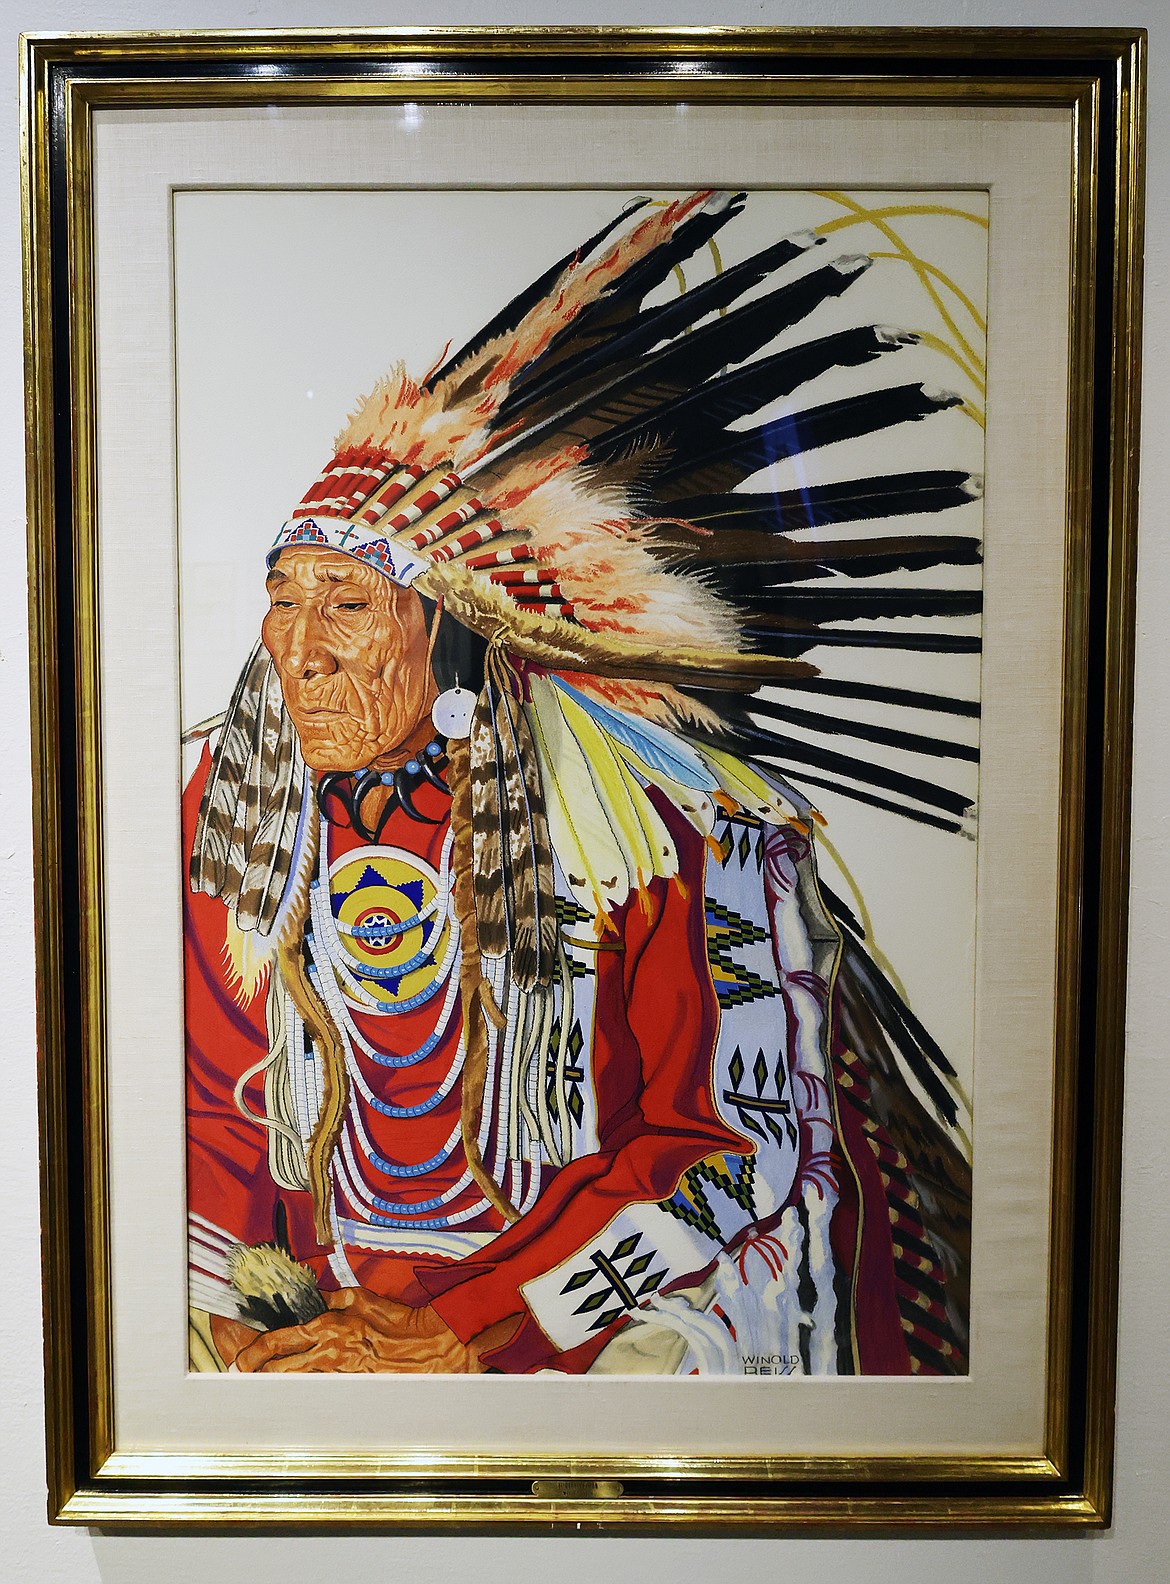 A portrait of Winold Reiss' longtime friend Turtle hangs as part of the “Connections – the Blackfeet and Winold Reiss” exhibit at the Museum of the Plains Indian in Browning. (Jeremy Weber/Daily Inter Lake)